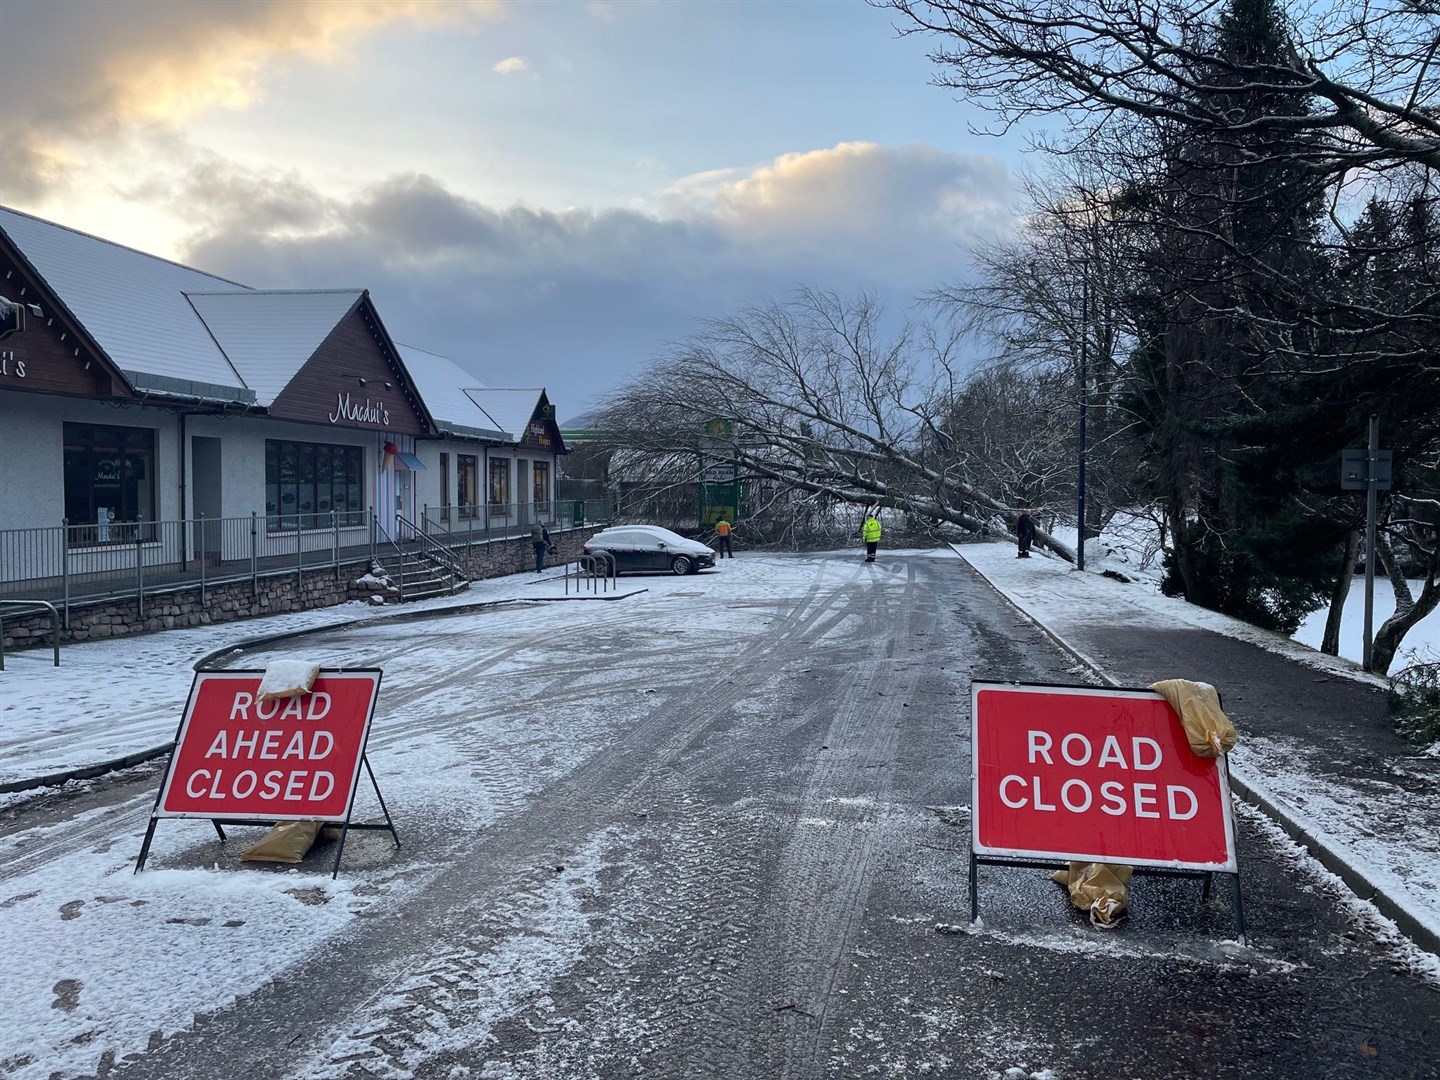 Grampian Road is not expected to re-open until later this afternoon.